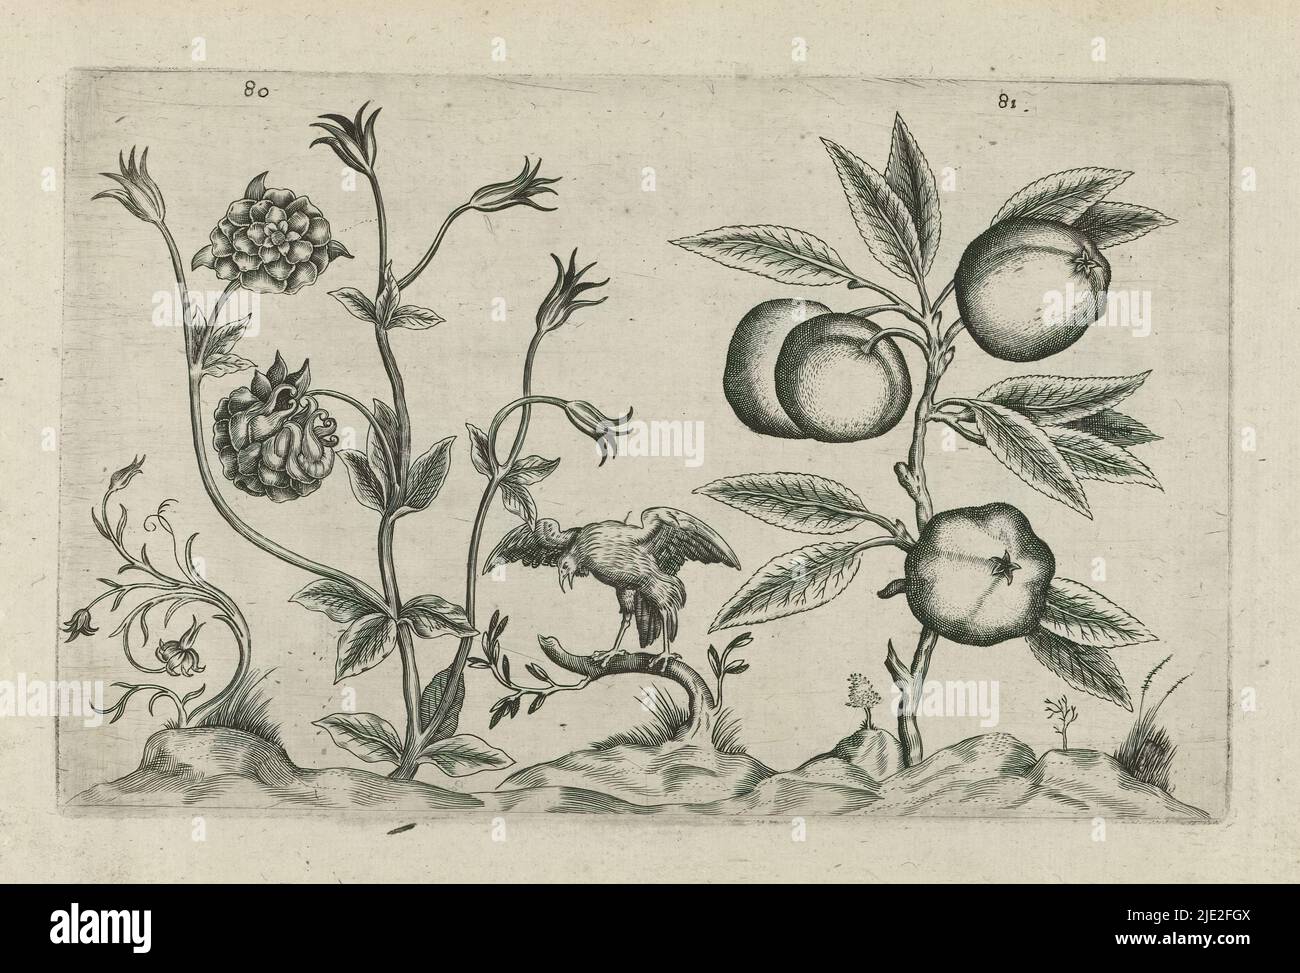 Double Columbine and apple, Cognoscite lilia (series title), Double Columbine (Aquilegia vulgaris) and apple (Malus pumila Miller), numbered 80 and 81. Between them a bird of prey., print maker: Crispijn van de Passe (I), (attributed to), after drawing by: Crispijn van de Passe (I), (attributed to), publisher: Crispijn van de Passe (I), print maker: Cologne, after drawing by: Cologne, publisher: Cologne, publisher: London, 1600 - 1604, paper, engraving, height 127 mm × width 205 mm, height 172 mm × width 272 mm Stock Photo